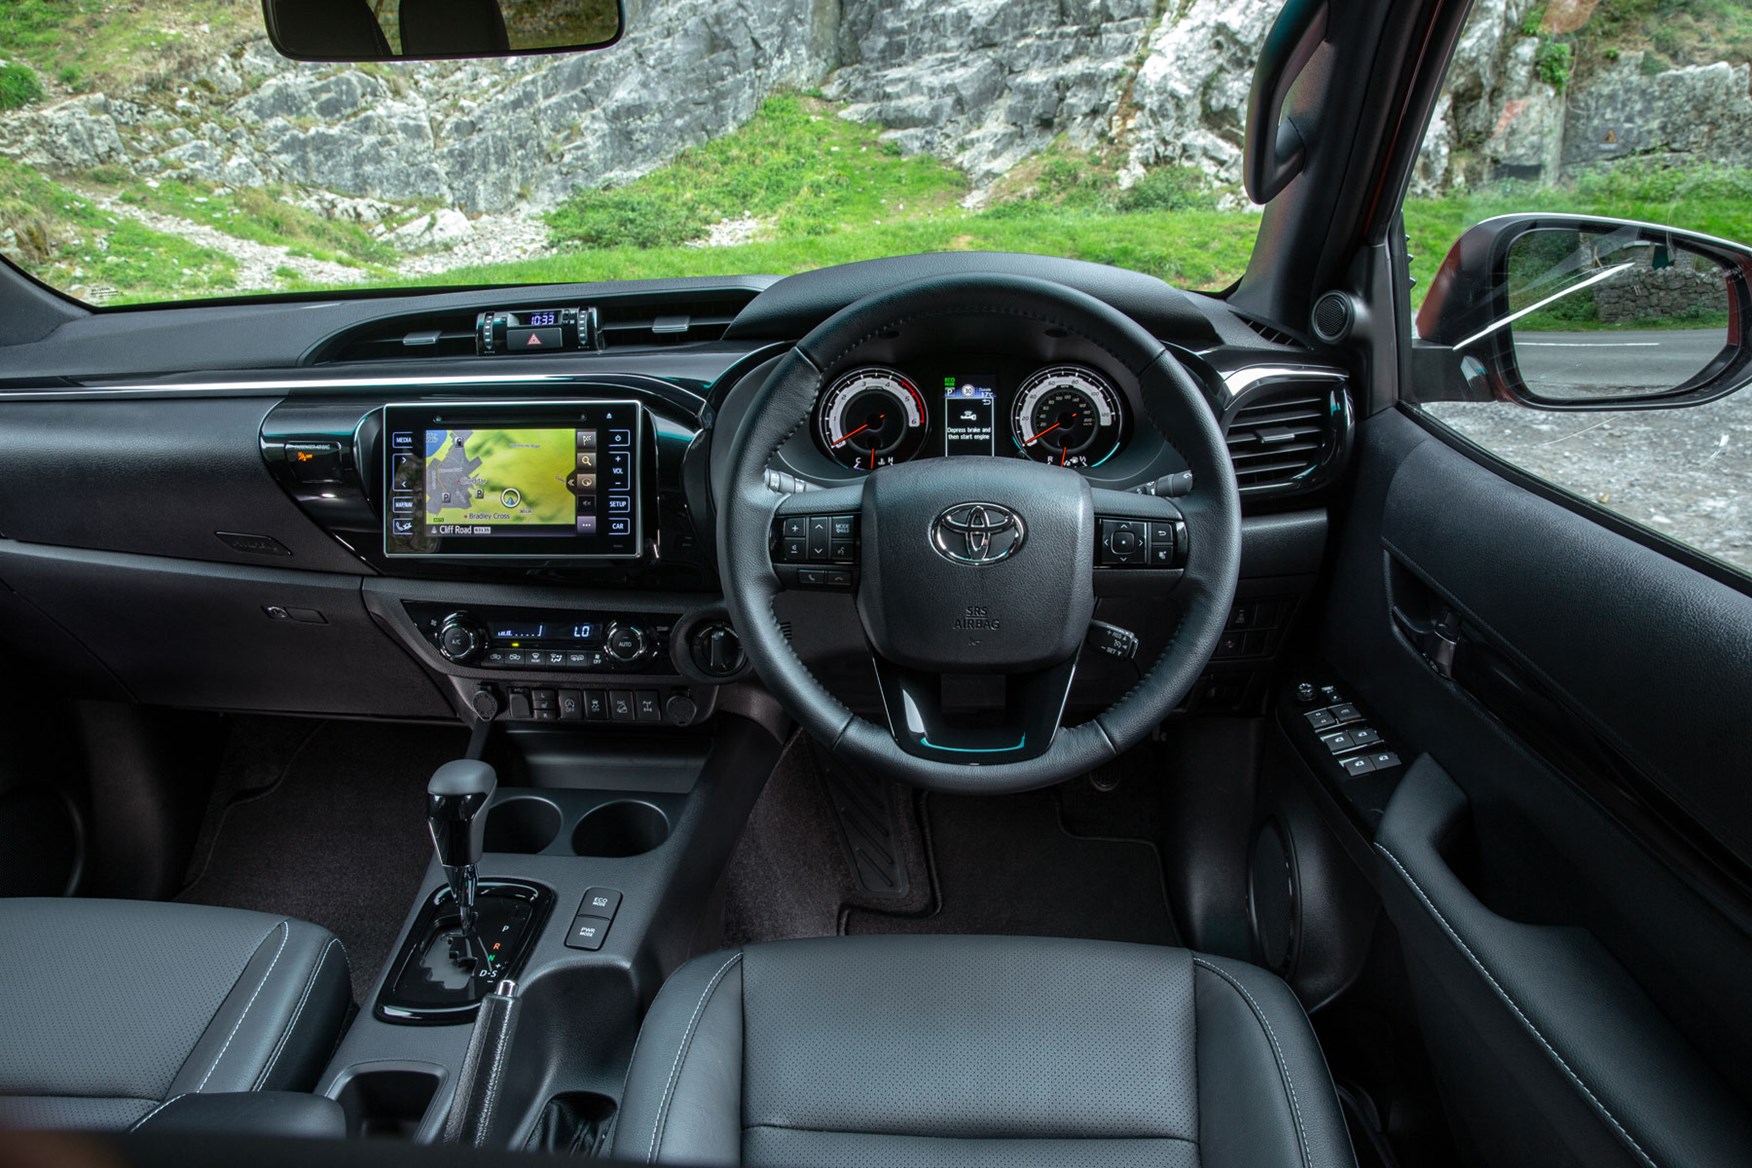 Toyota Hilux review - cab interior, steering wheel, dashboard